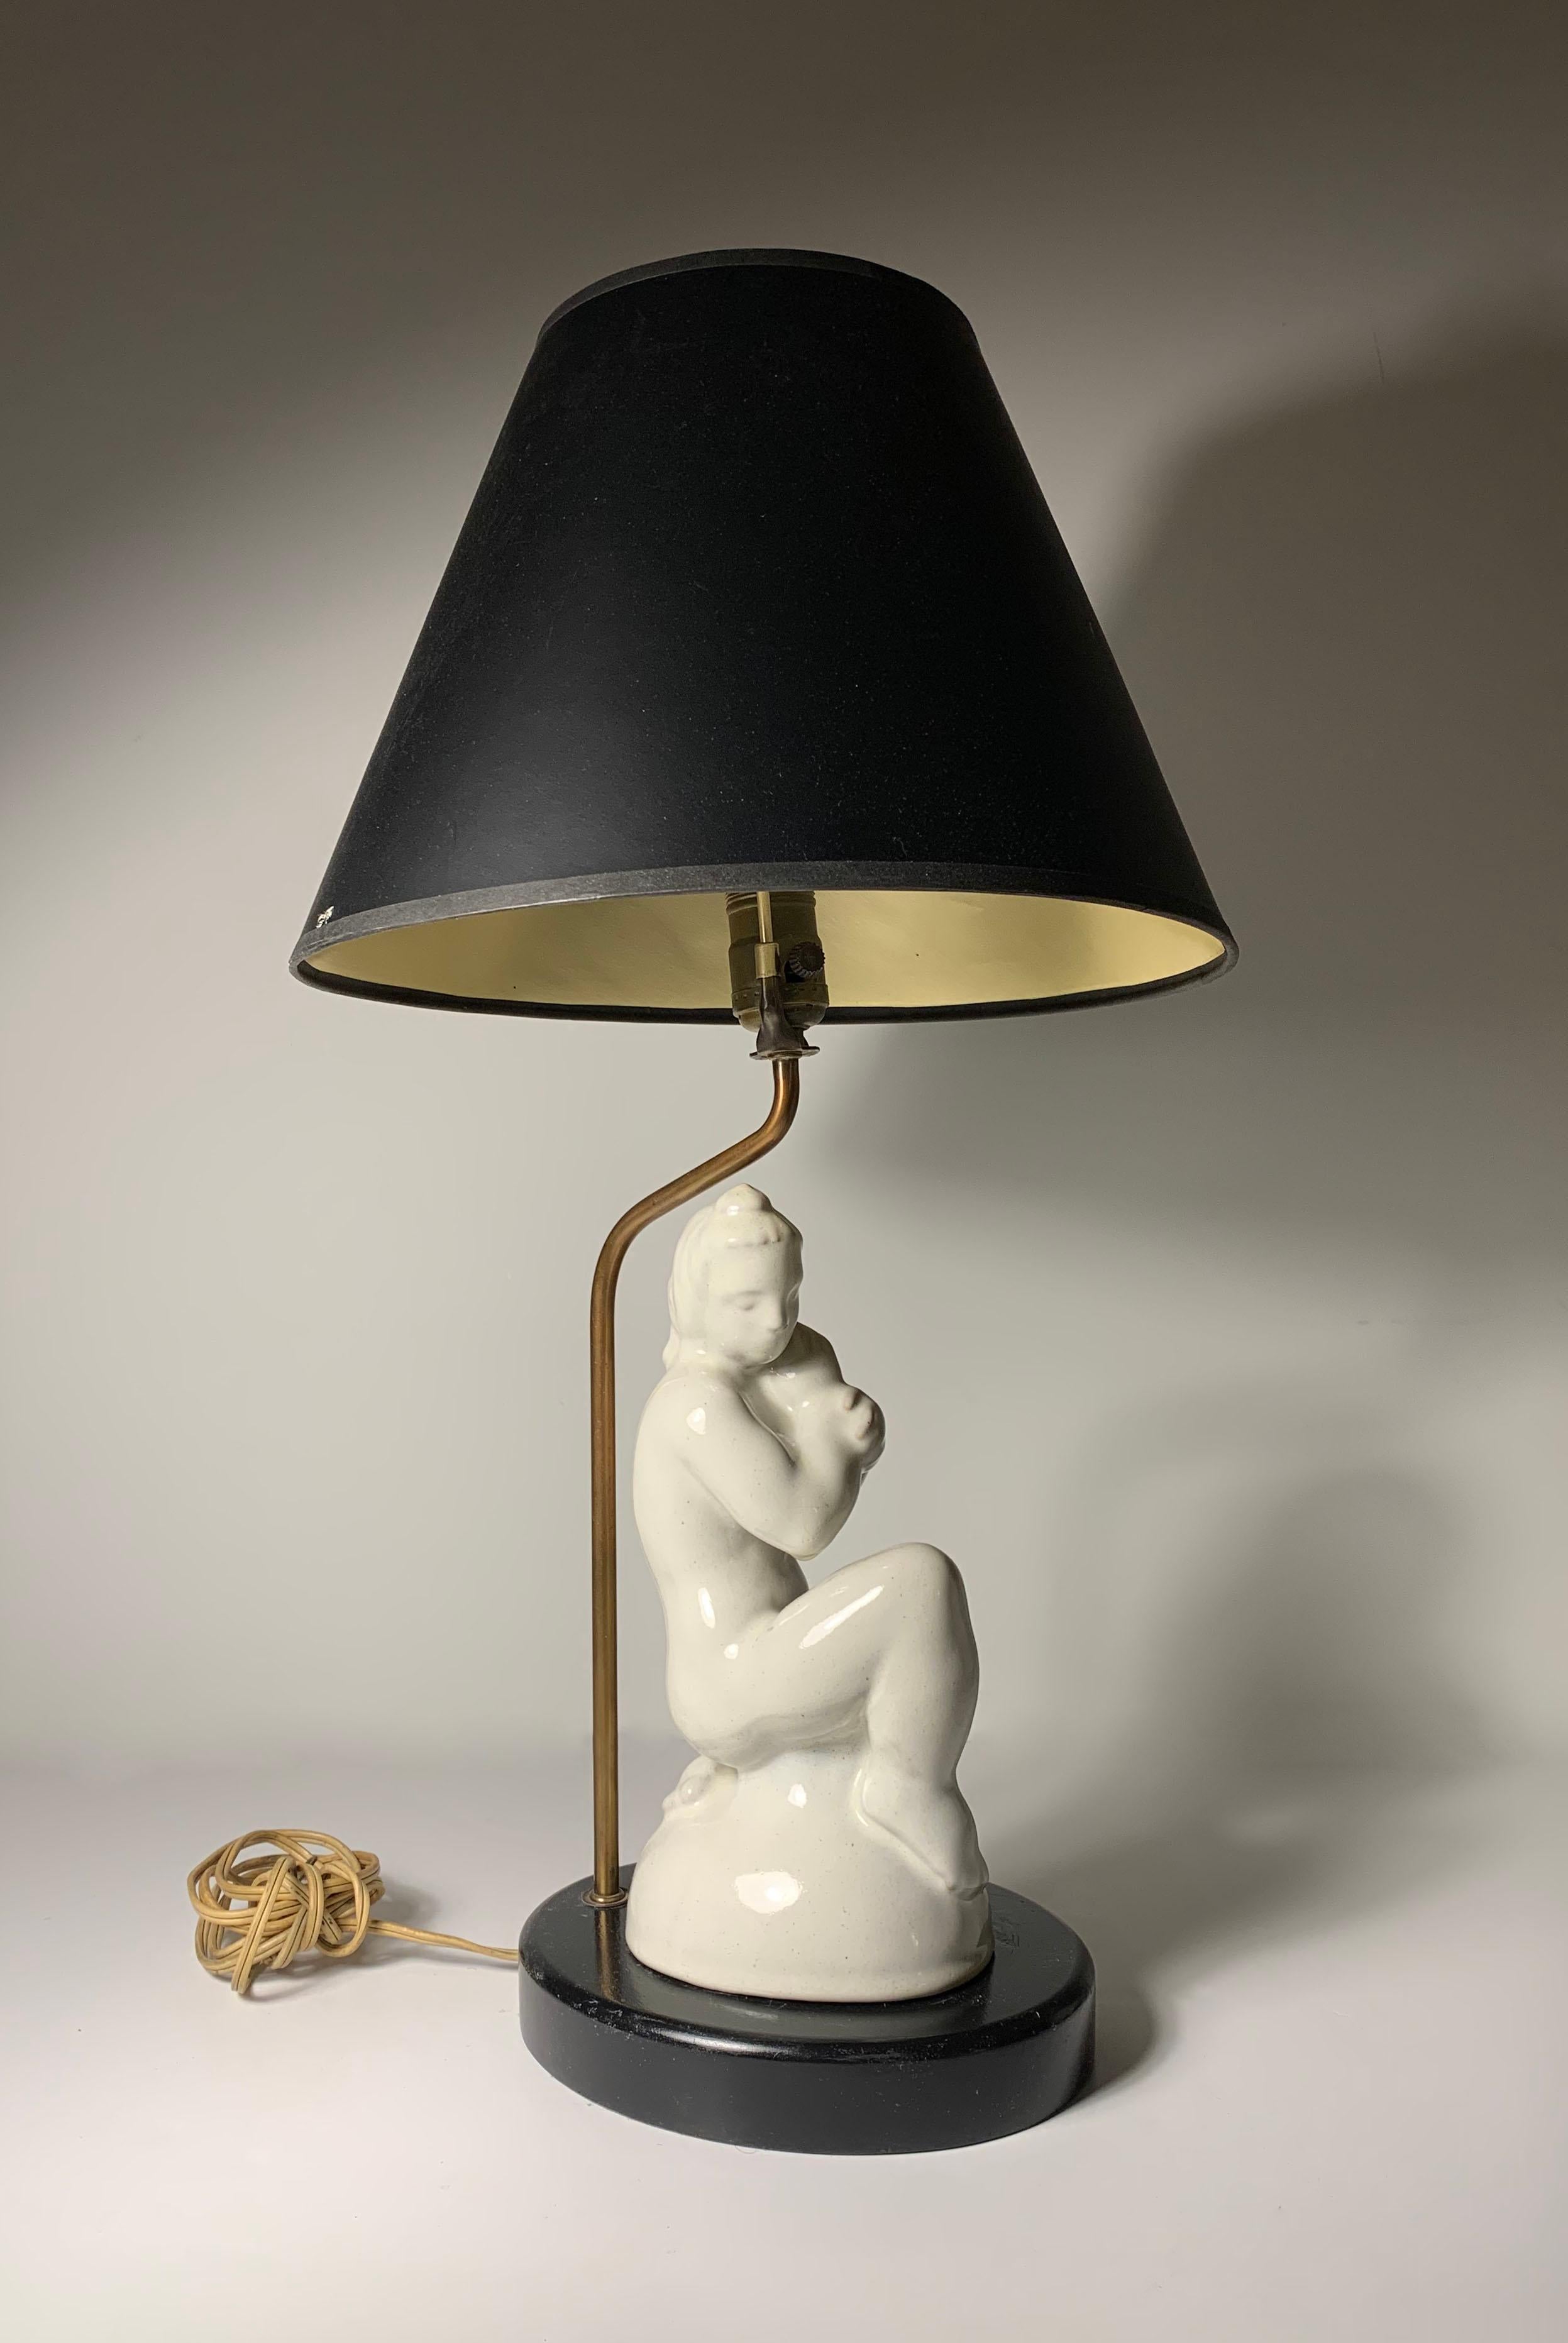 Interesting sculptural pottery table lamp. The ceramic free standing with a clip to hold it in place. So, can also remove the lamp parts and have just the sculpture. Uncertain as to the origin and period. Looks to be European from the 1940s/50s or